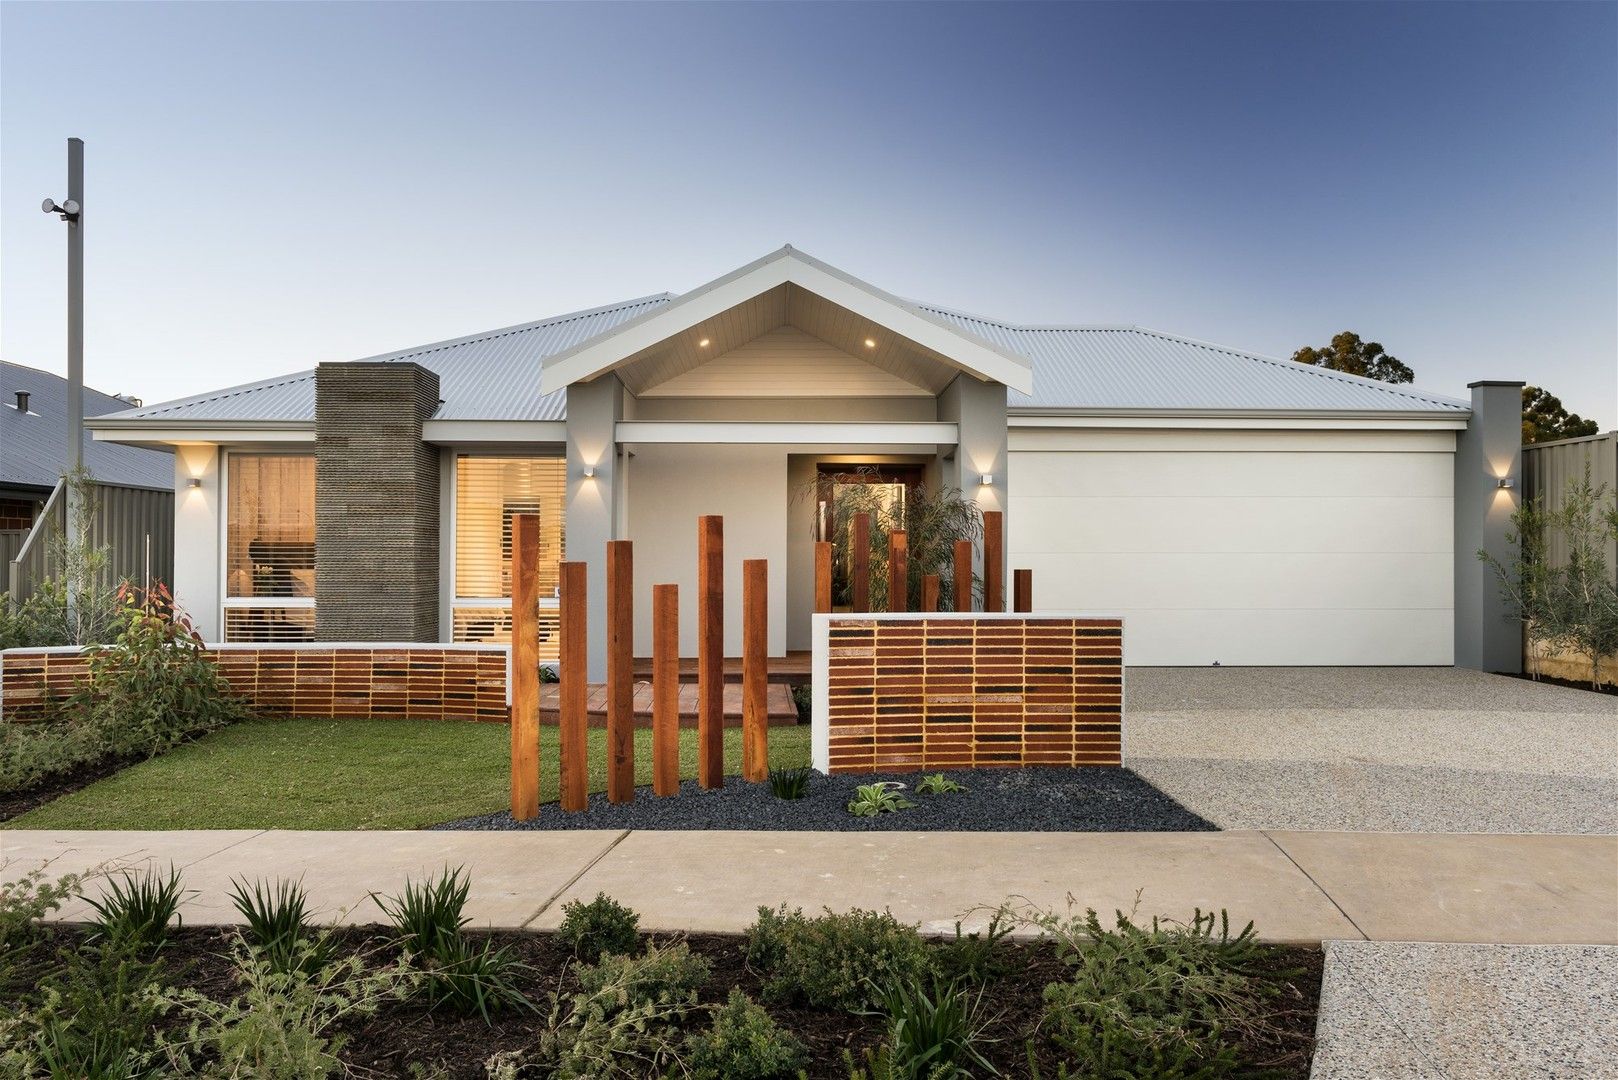 4 bedrooms New House & Land in 18 Liffey Street CANNING VALE WA, 6155